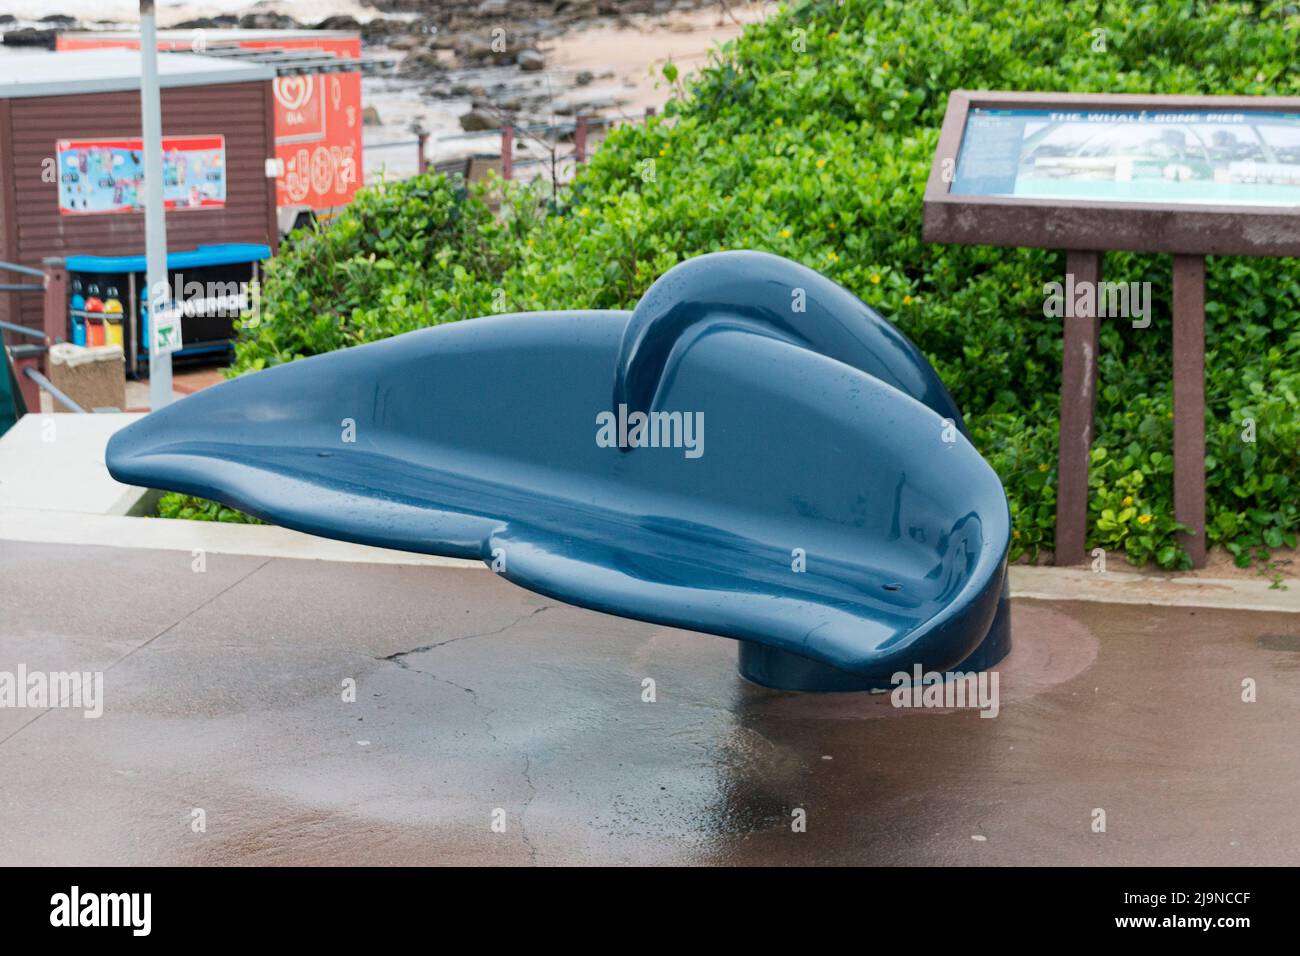 A close up view of a seat in the shape of a whales tale at the beach front Stock Photo